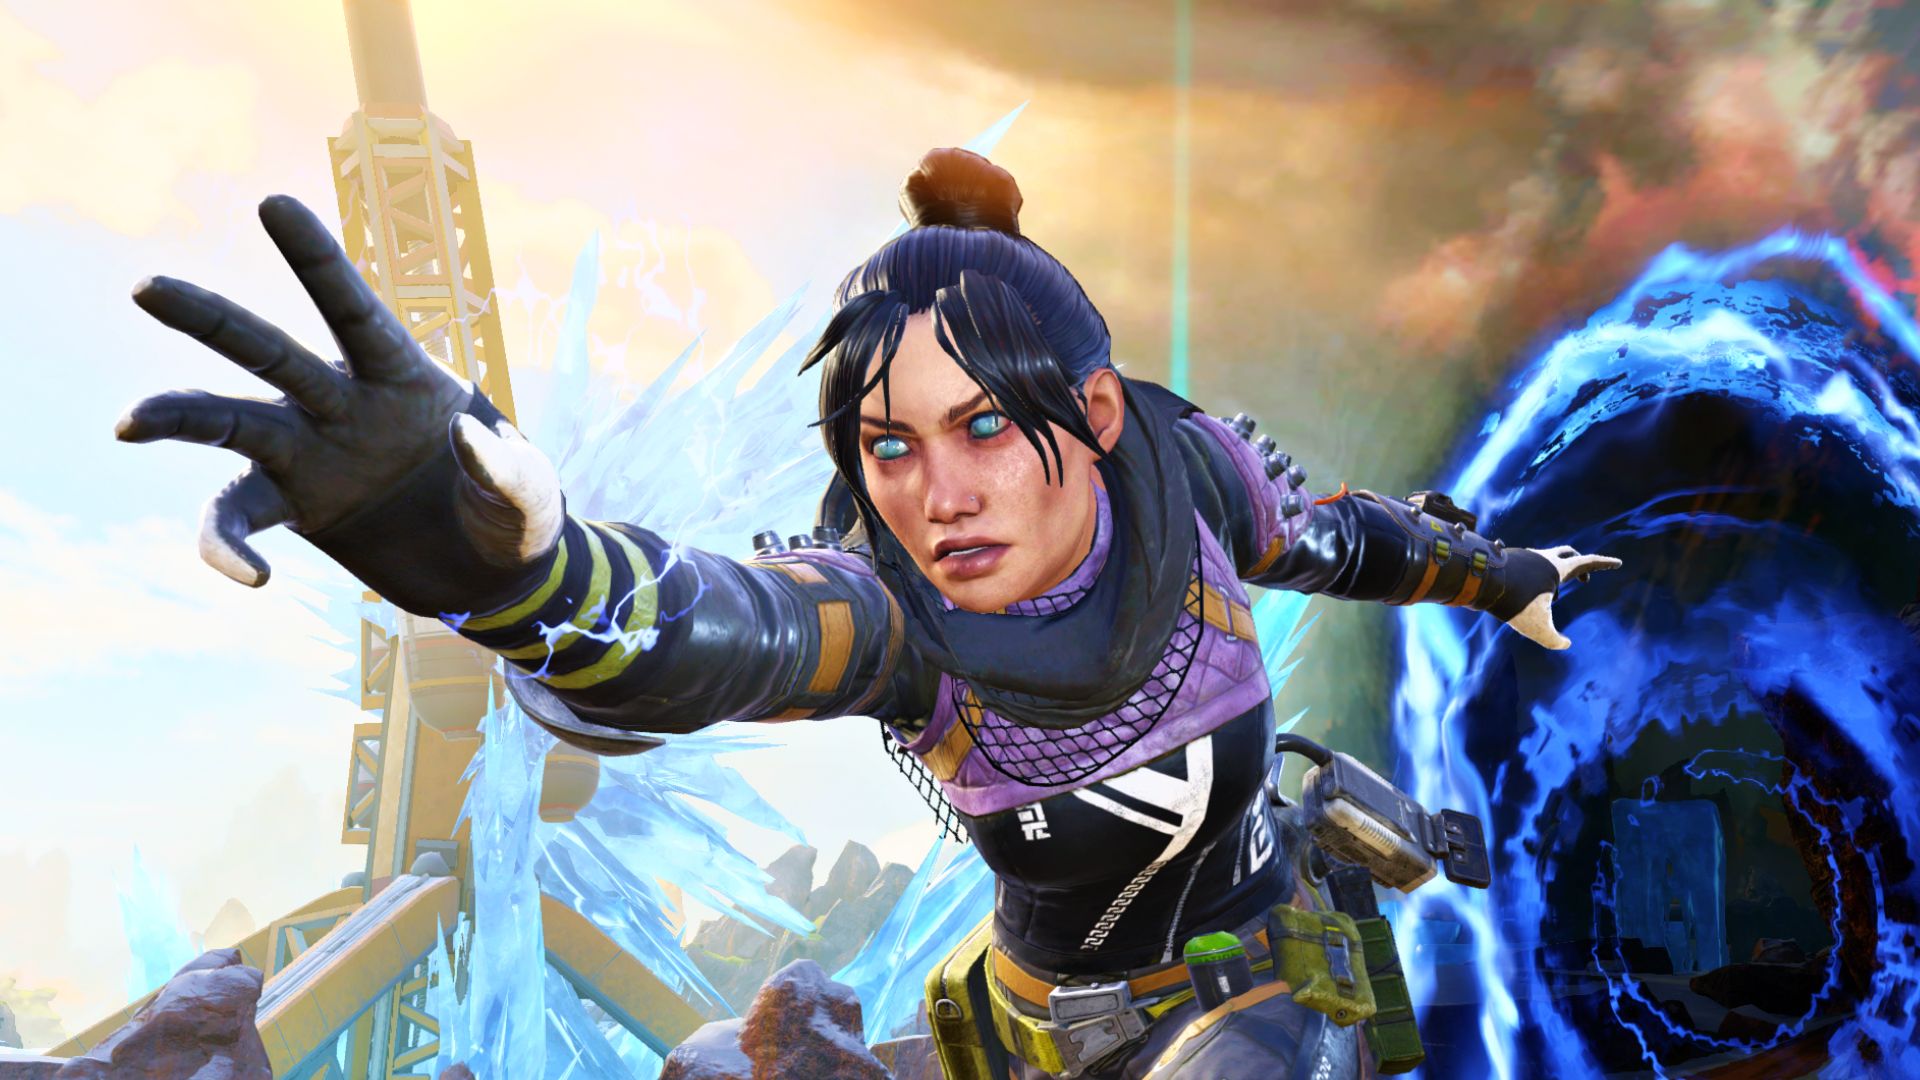 Apex Legends creator skins had no benefit, says Twitch's LuluLuvely